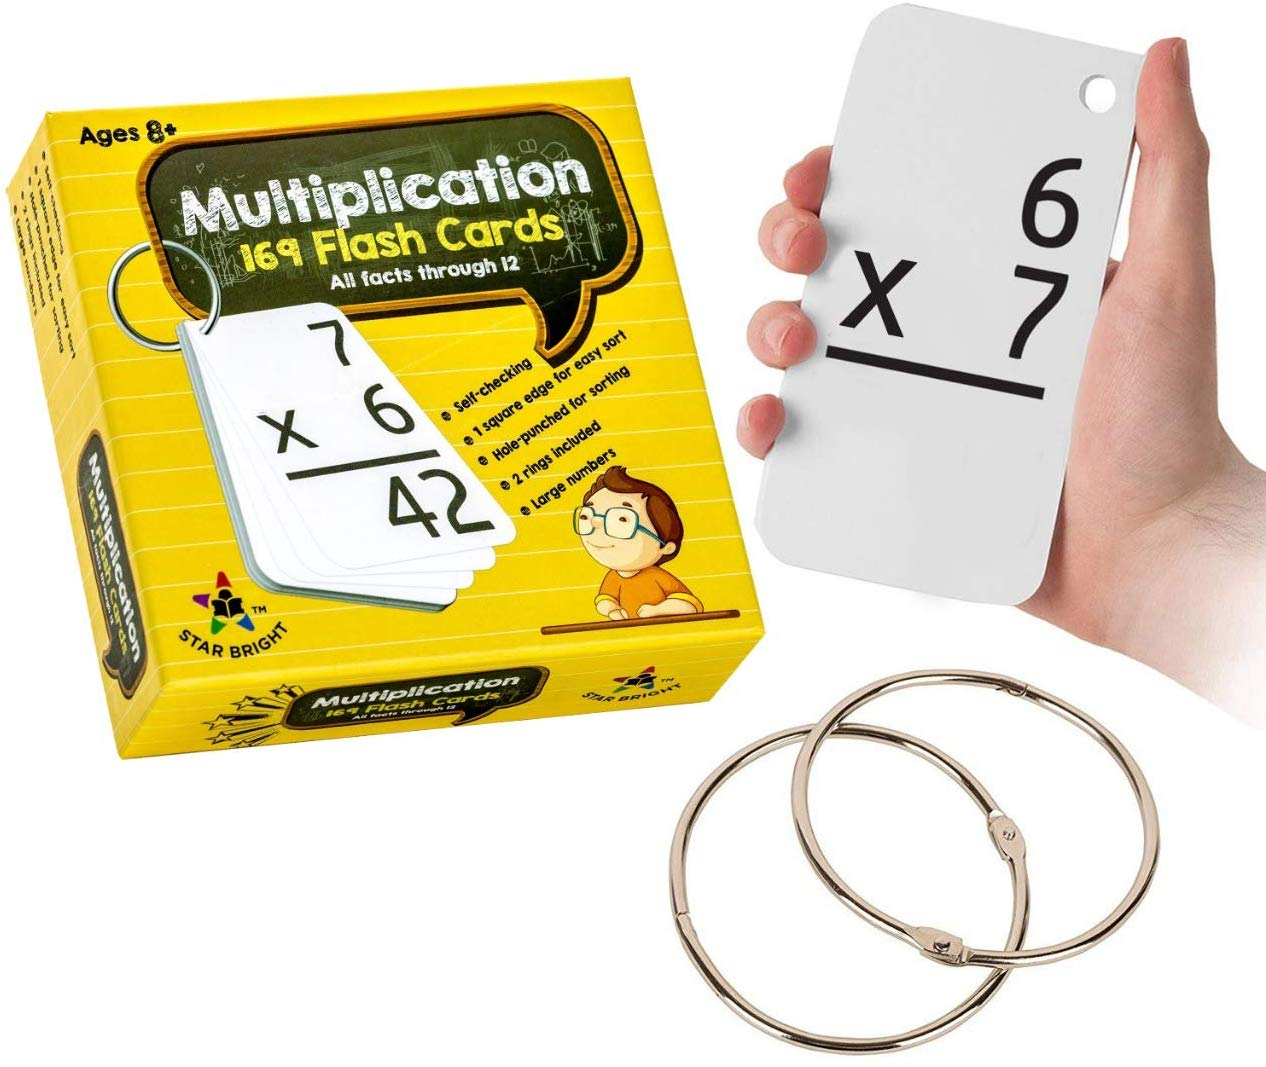 Star Right Education Multiplication Flash Cards | Family